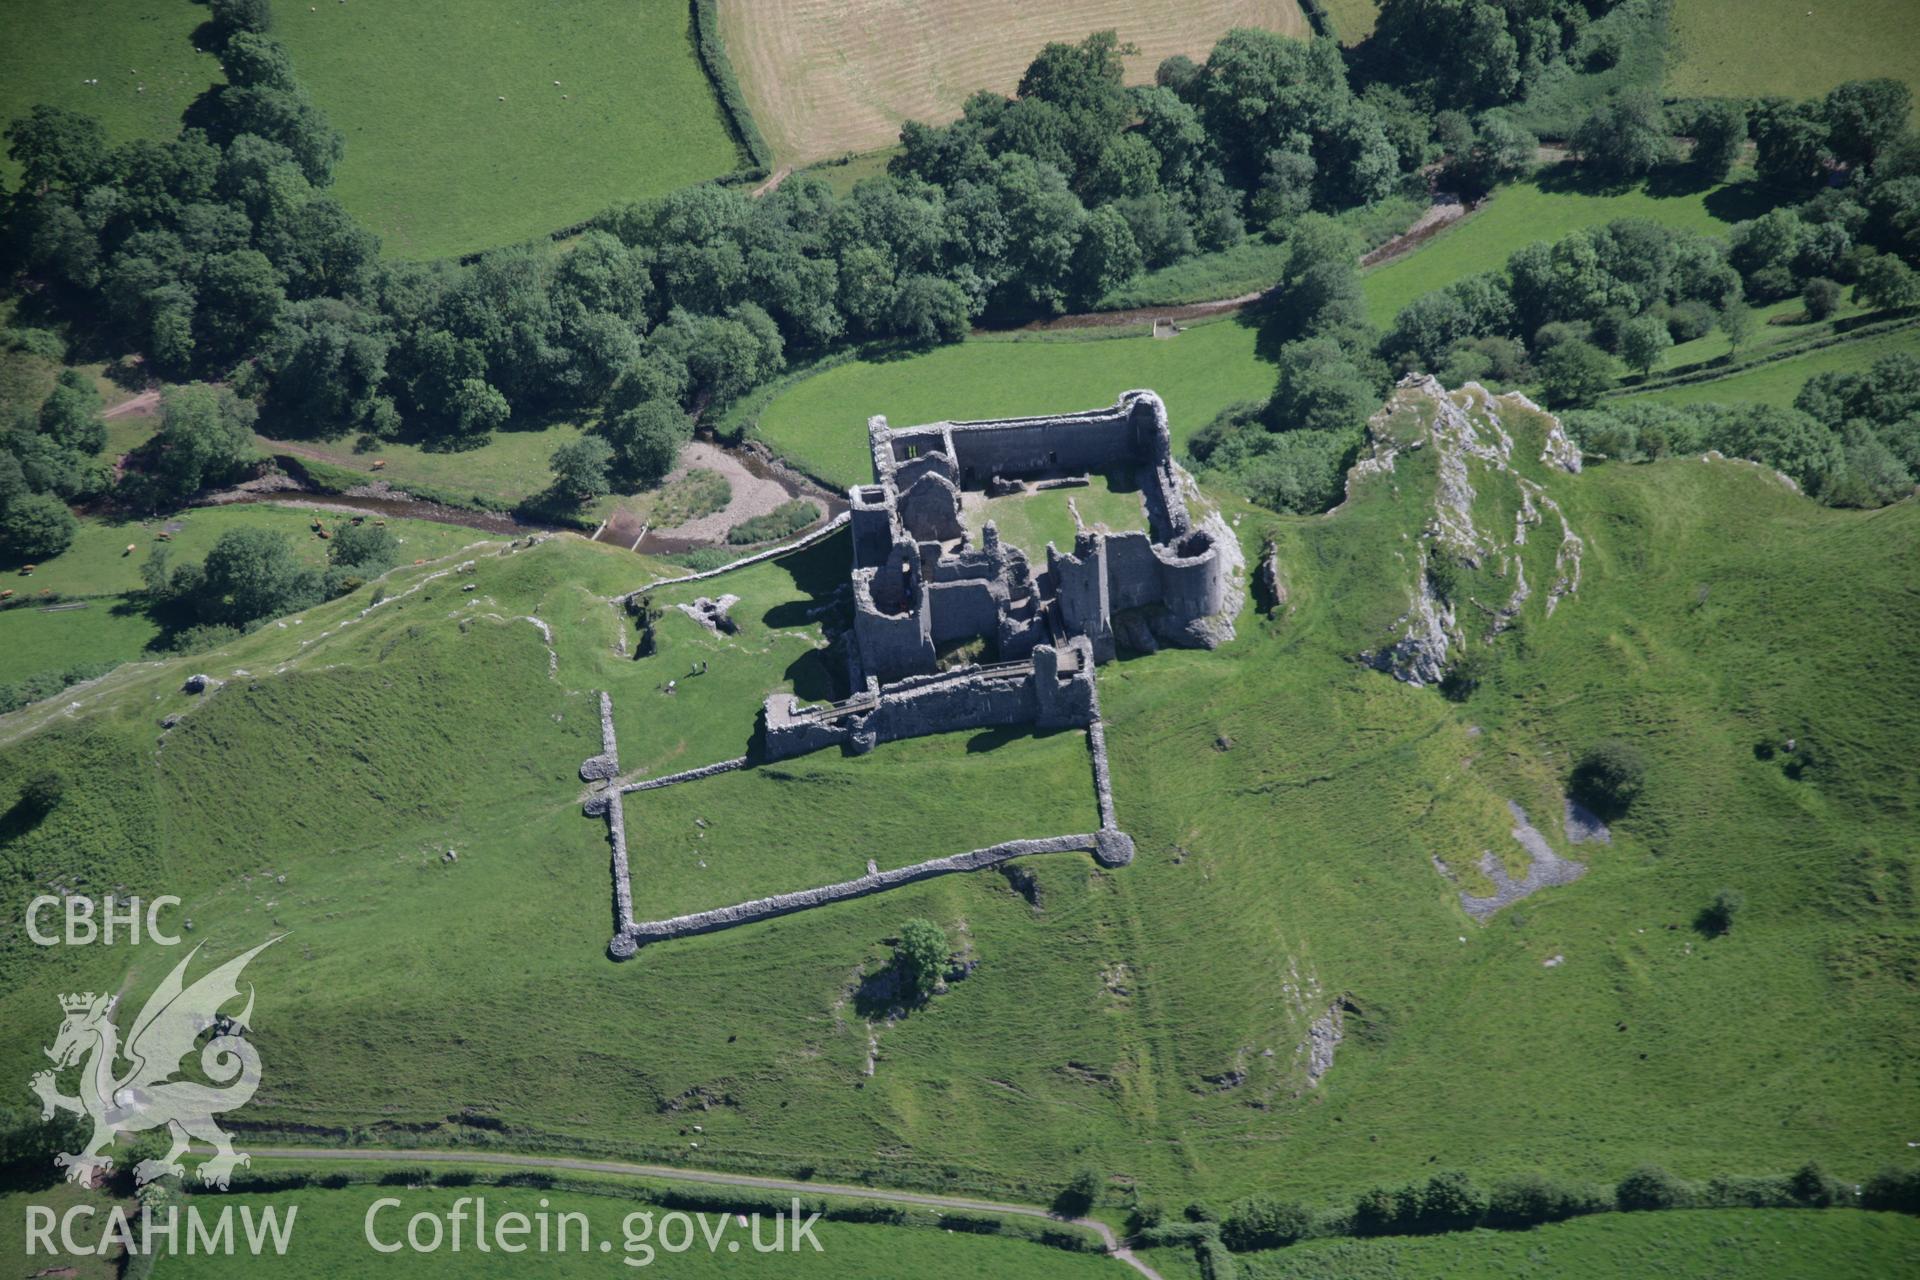 RCAHMW colour oblique aerial photograph of Carreg Cennen Castle from the north. Taken on 22 June 2005 by Toby Driver